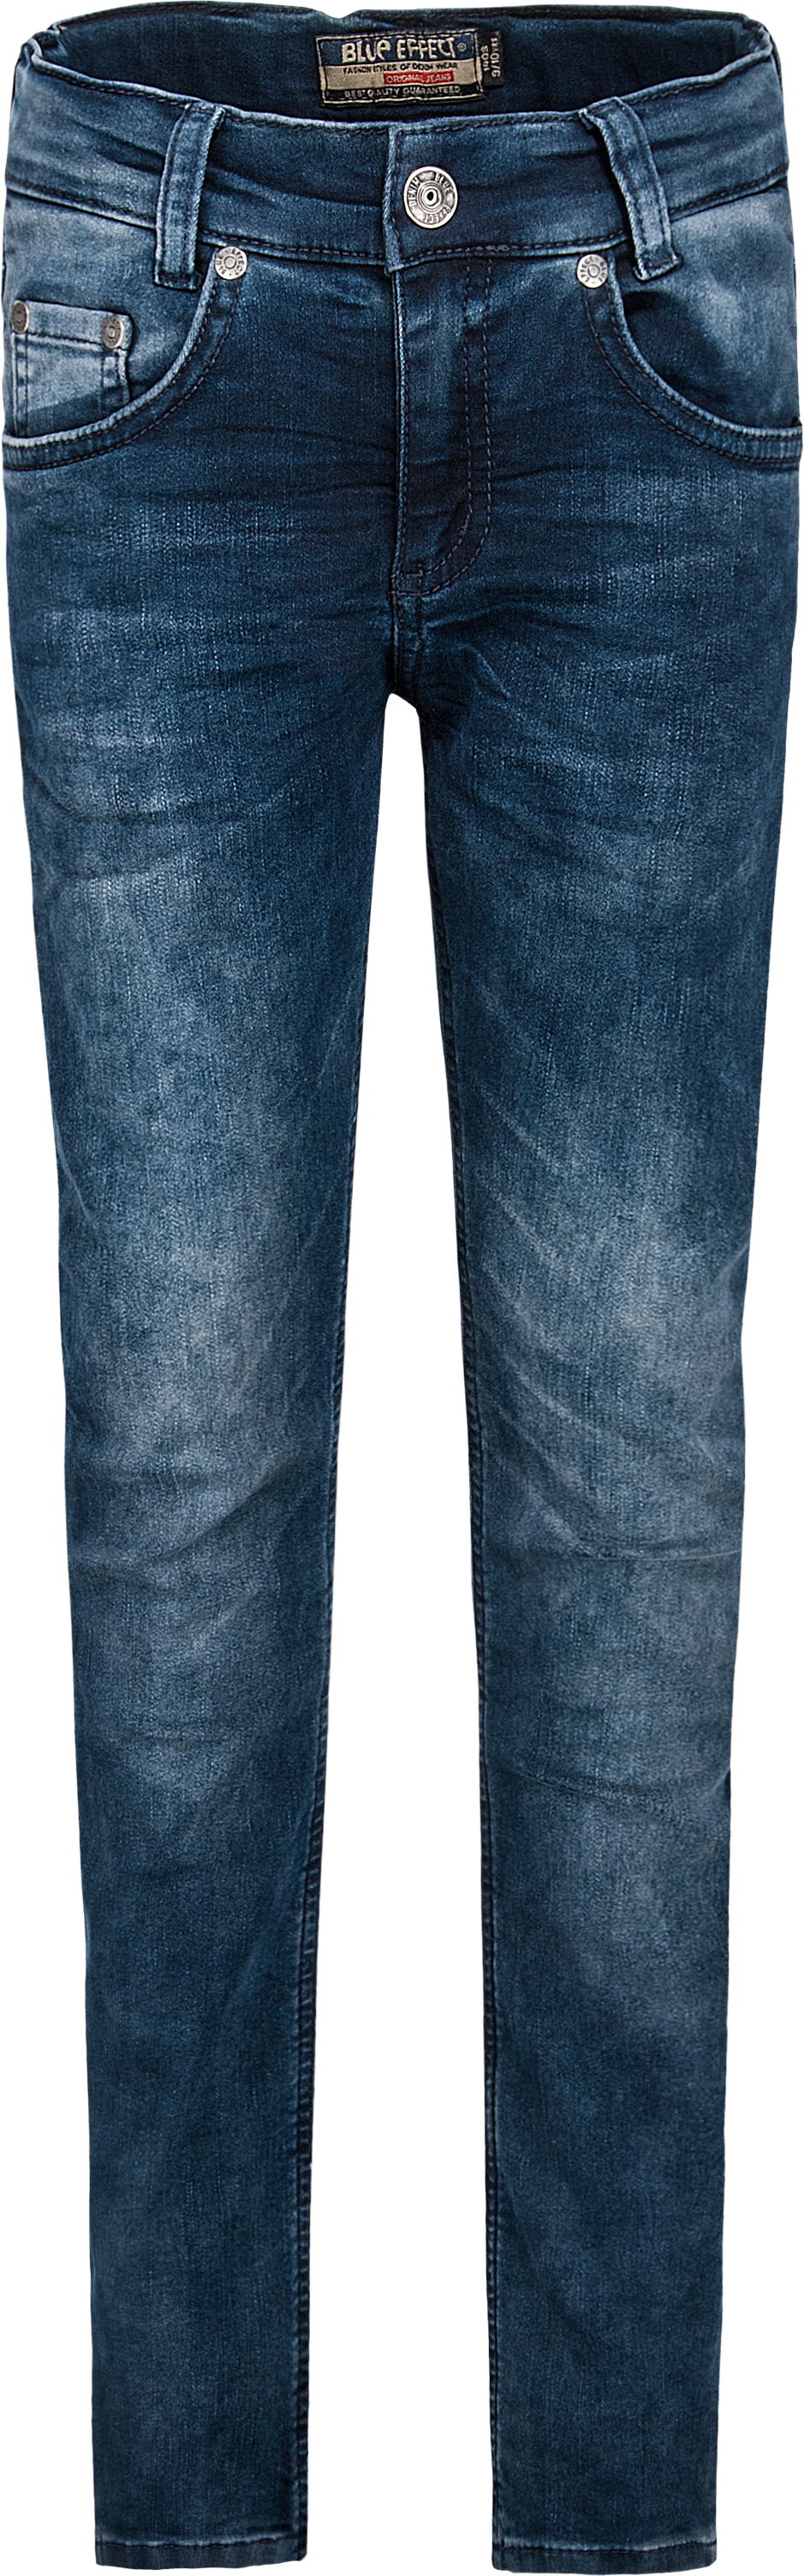 0226-NOS Boys Jeans Special Skinny, Ultrastretch, available in Slim,Normal,Wide